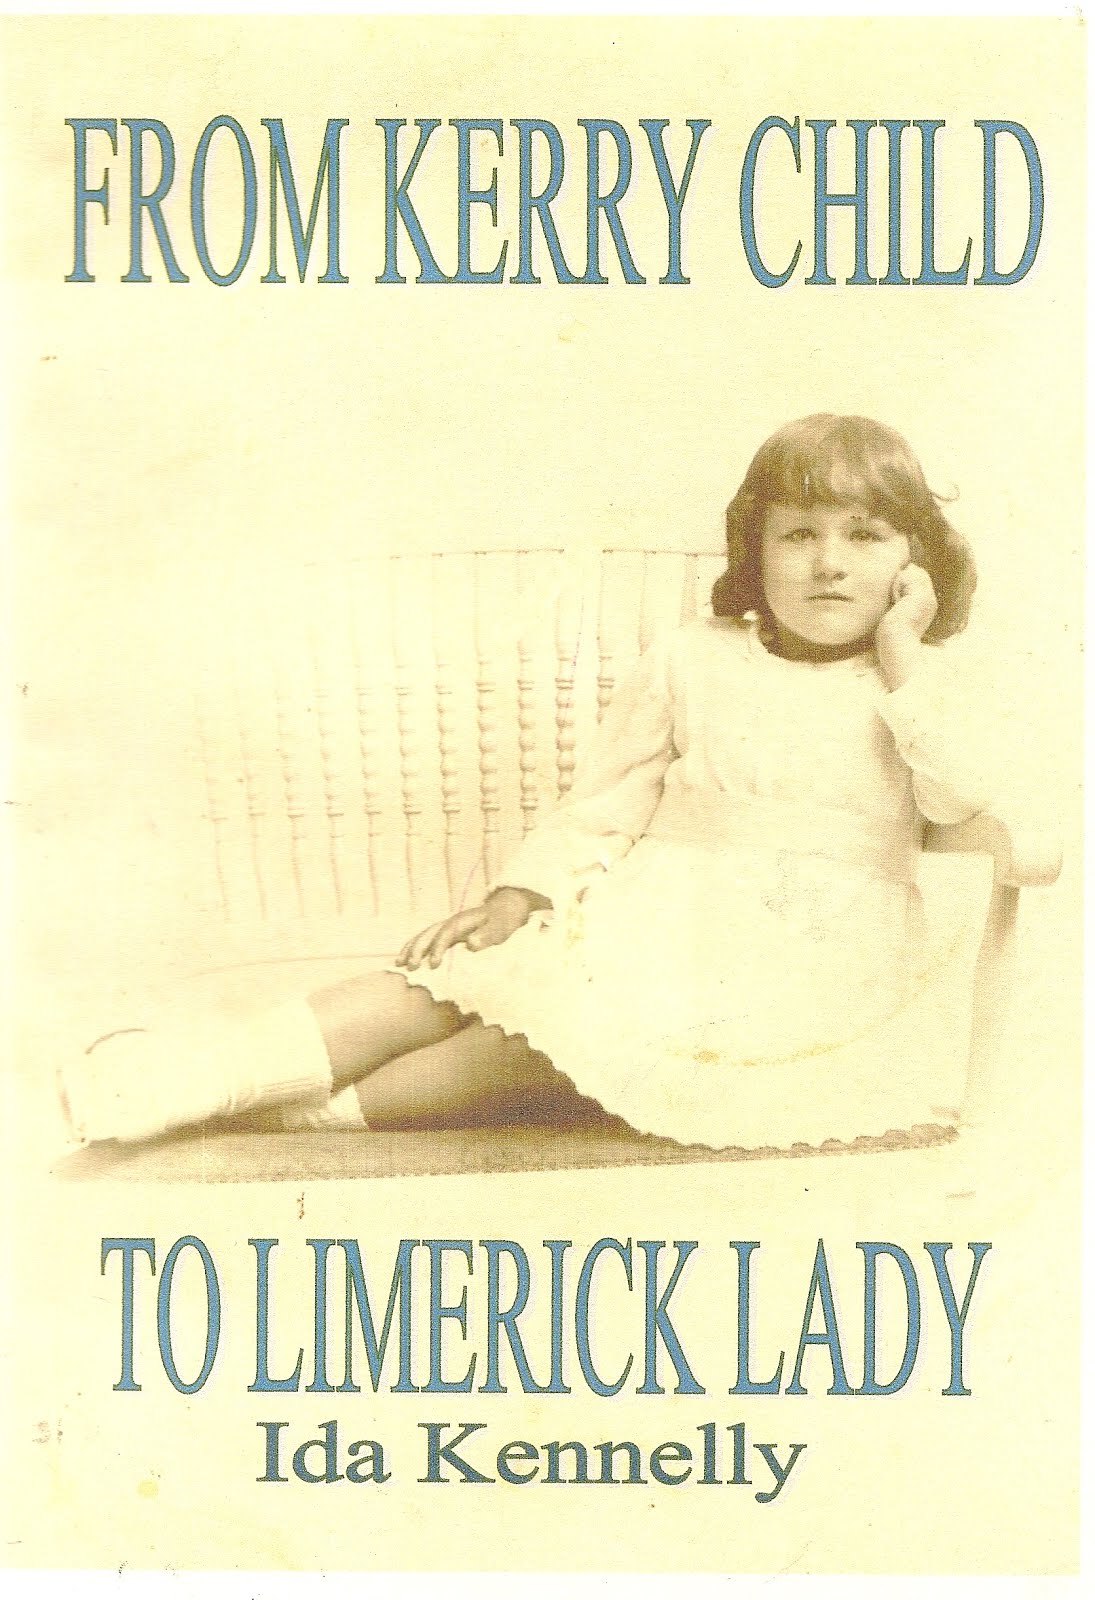 From Kerry Child to Limerick Lady, edited by MIW's Marion Riley.